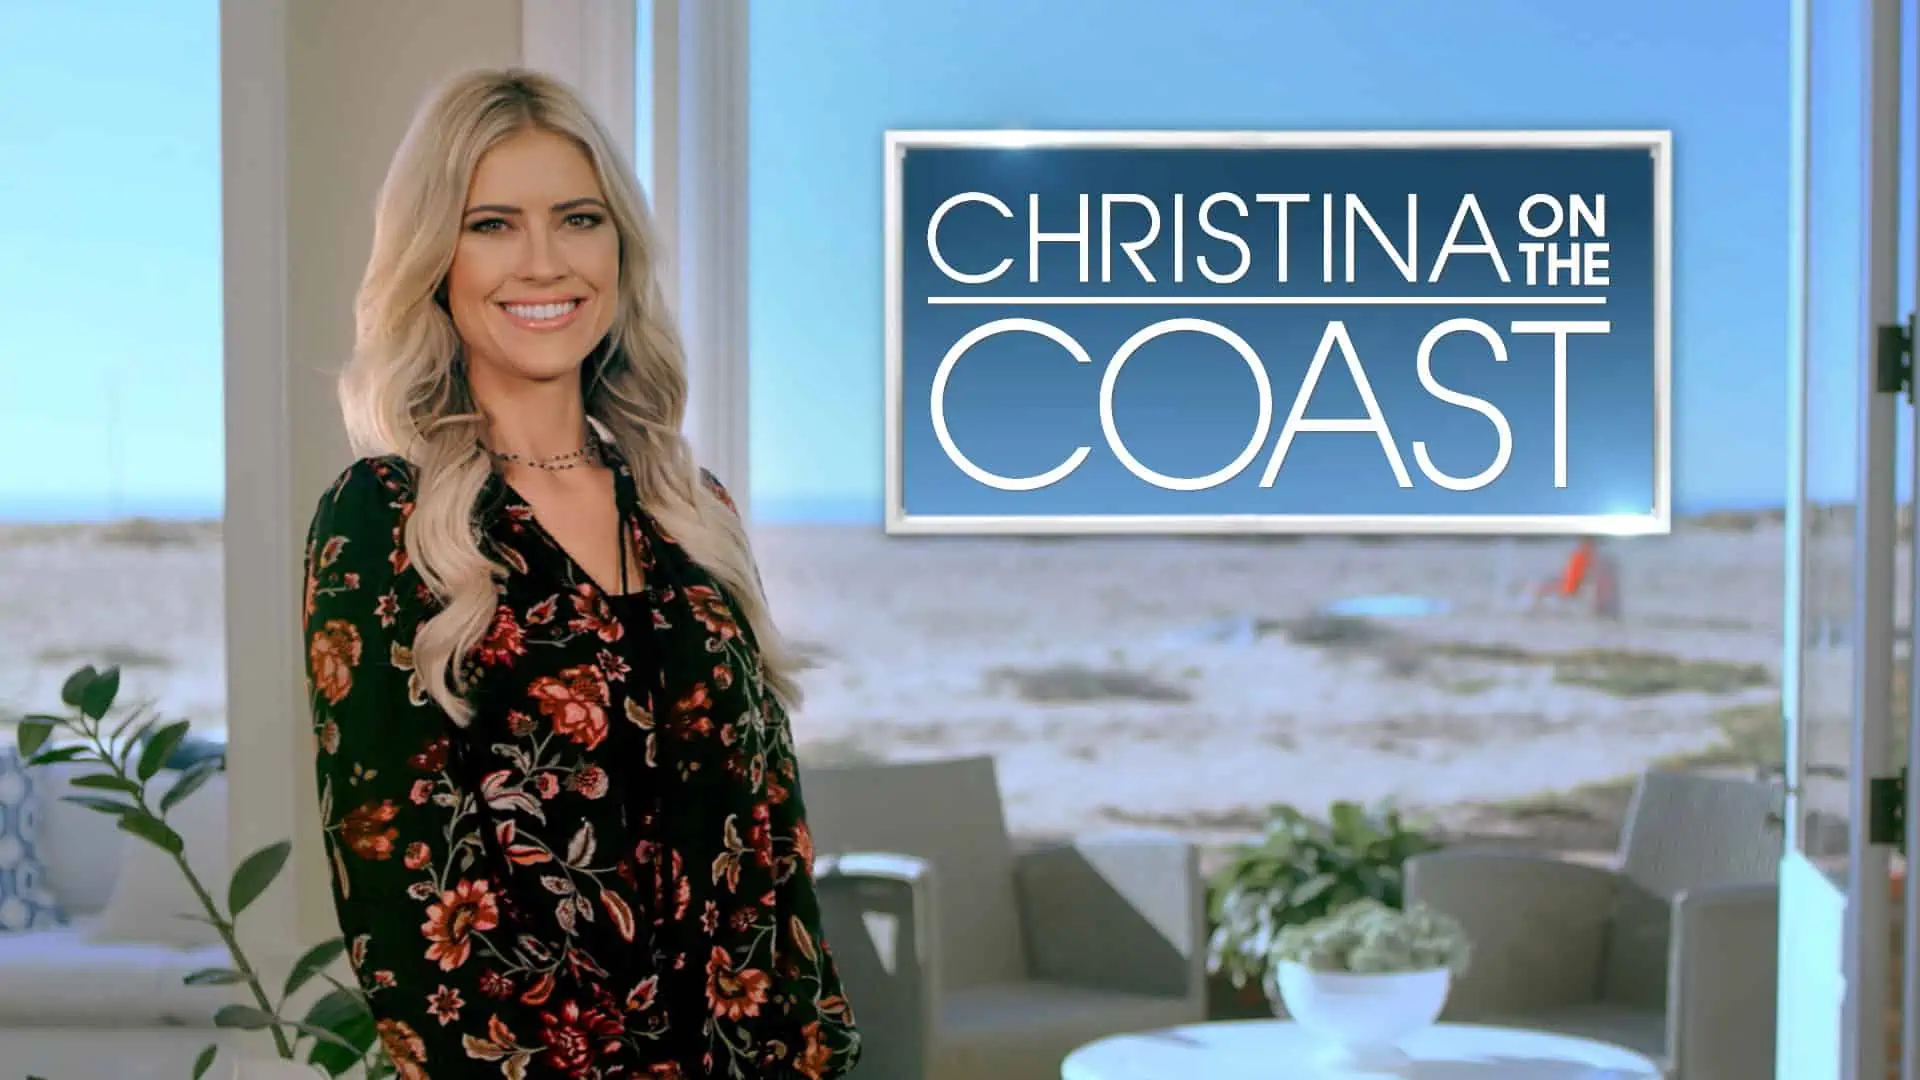 What You Need to Know About “Christina on the Coast”